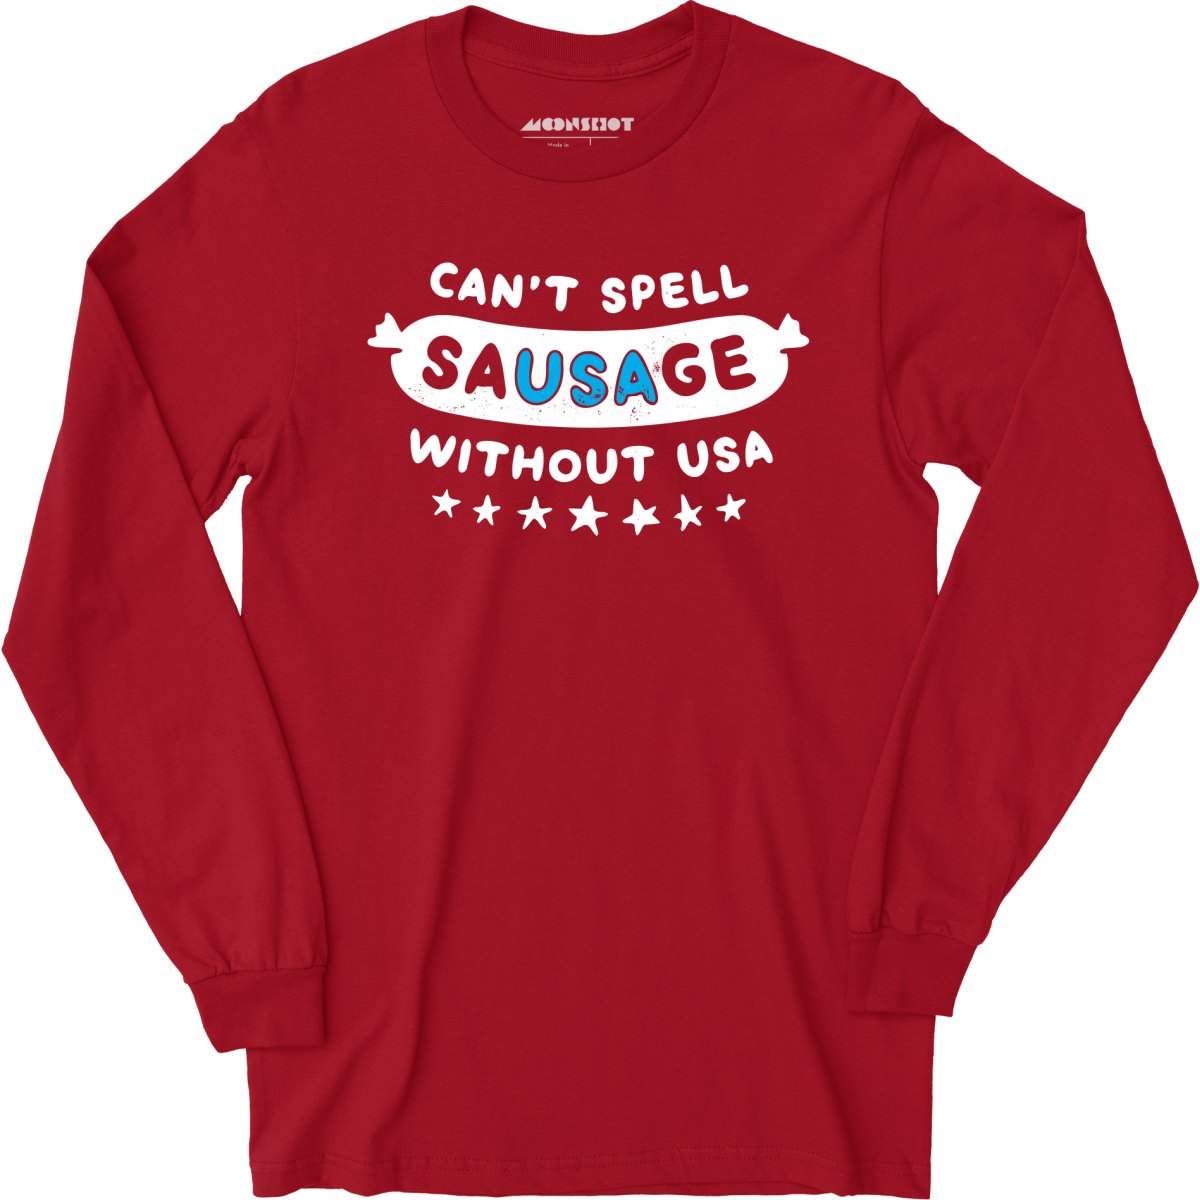 Can't Spell Sausage Without USA - Long Sleeve T-Shirt